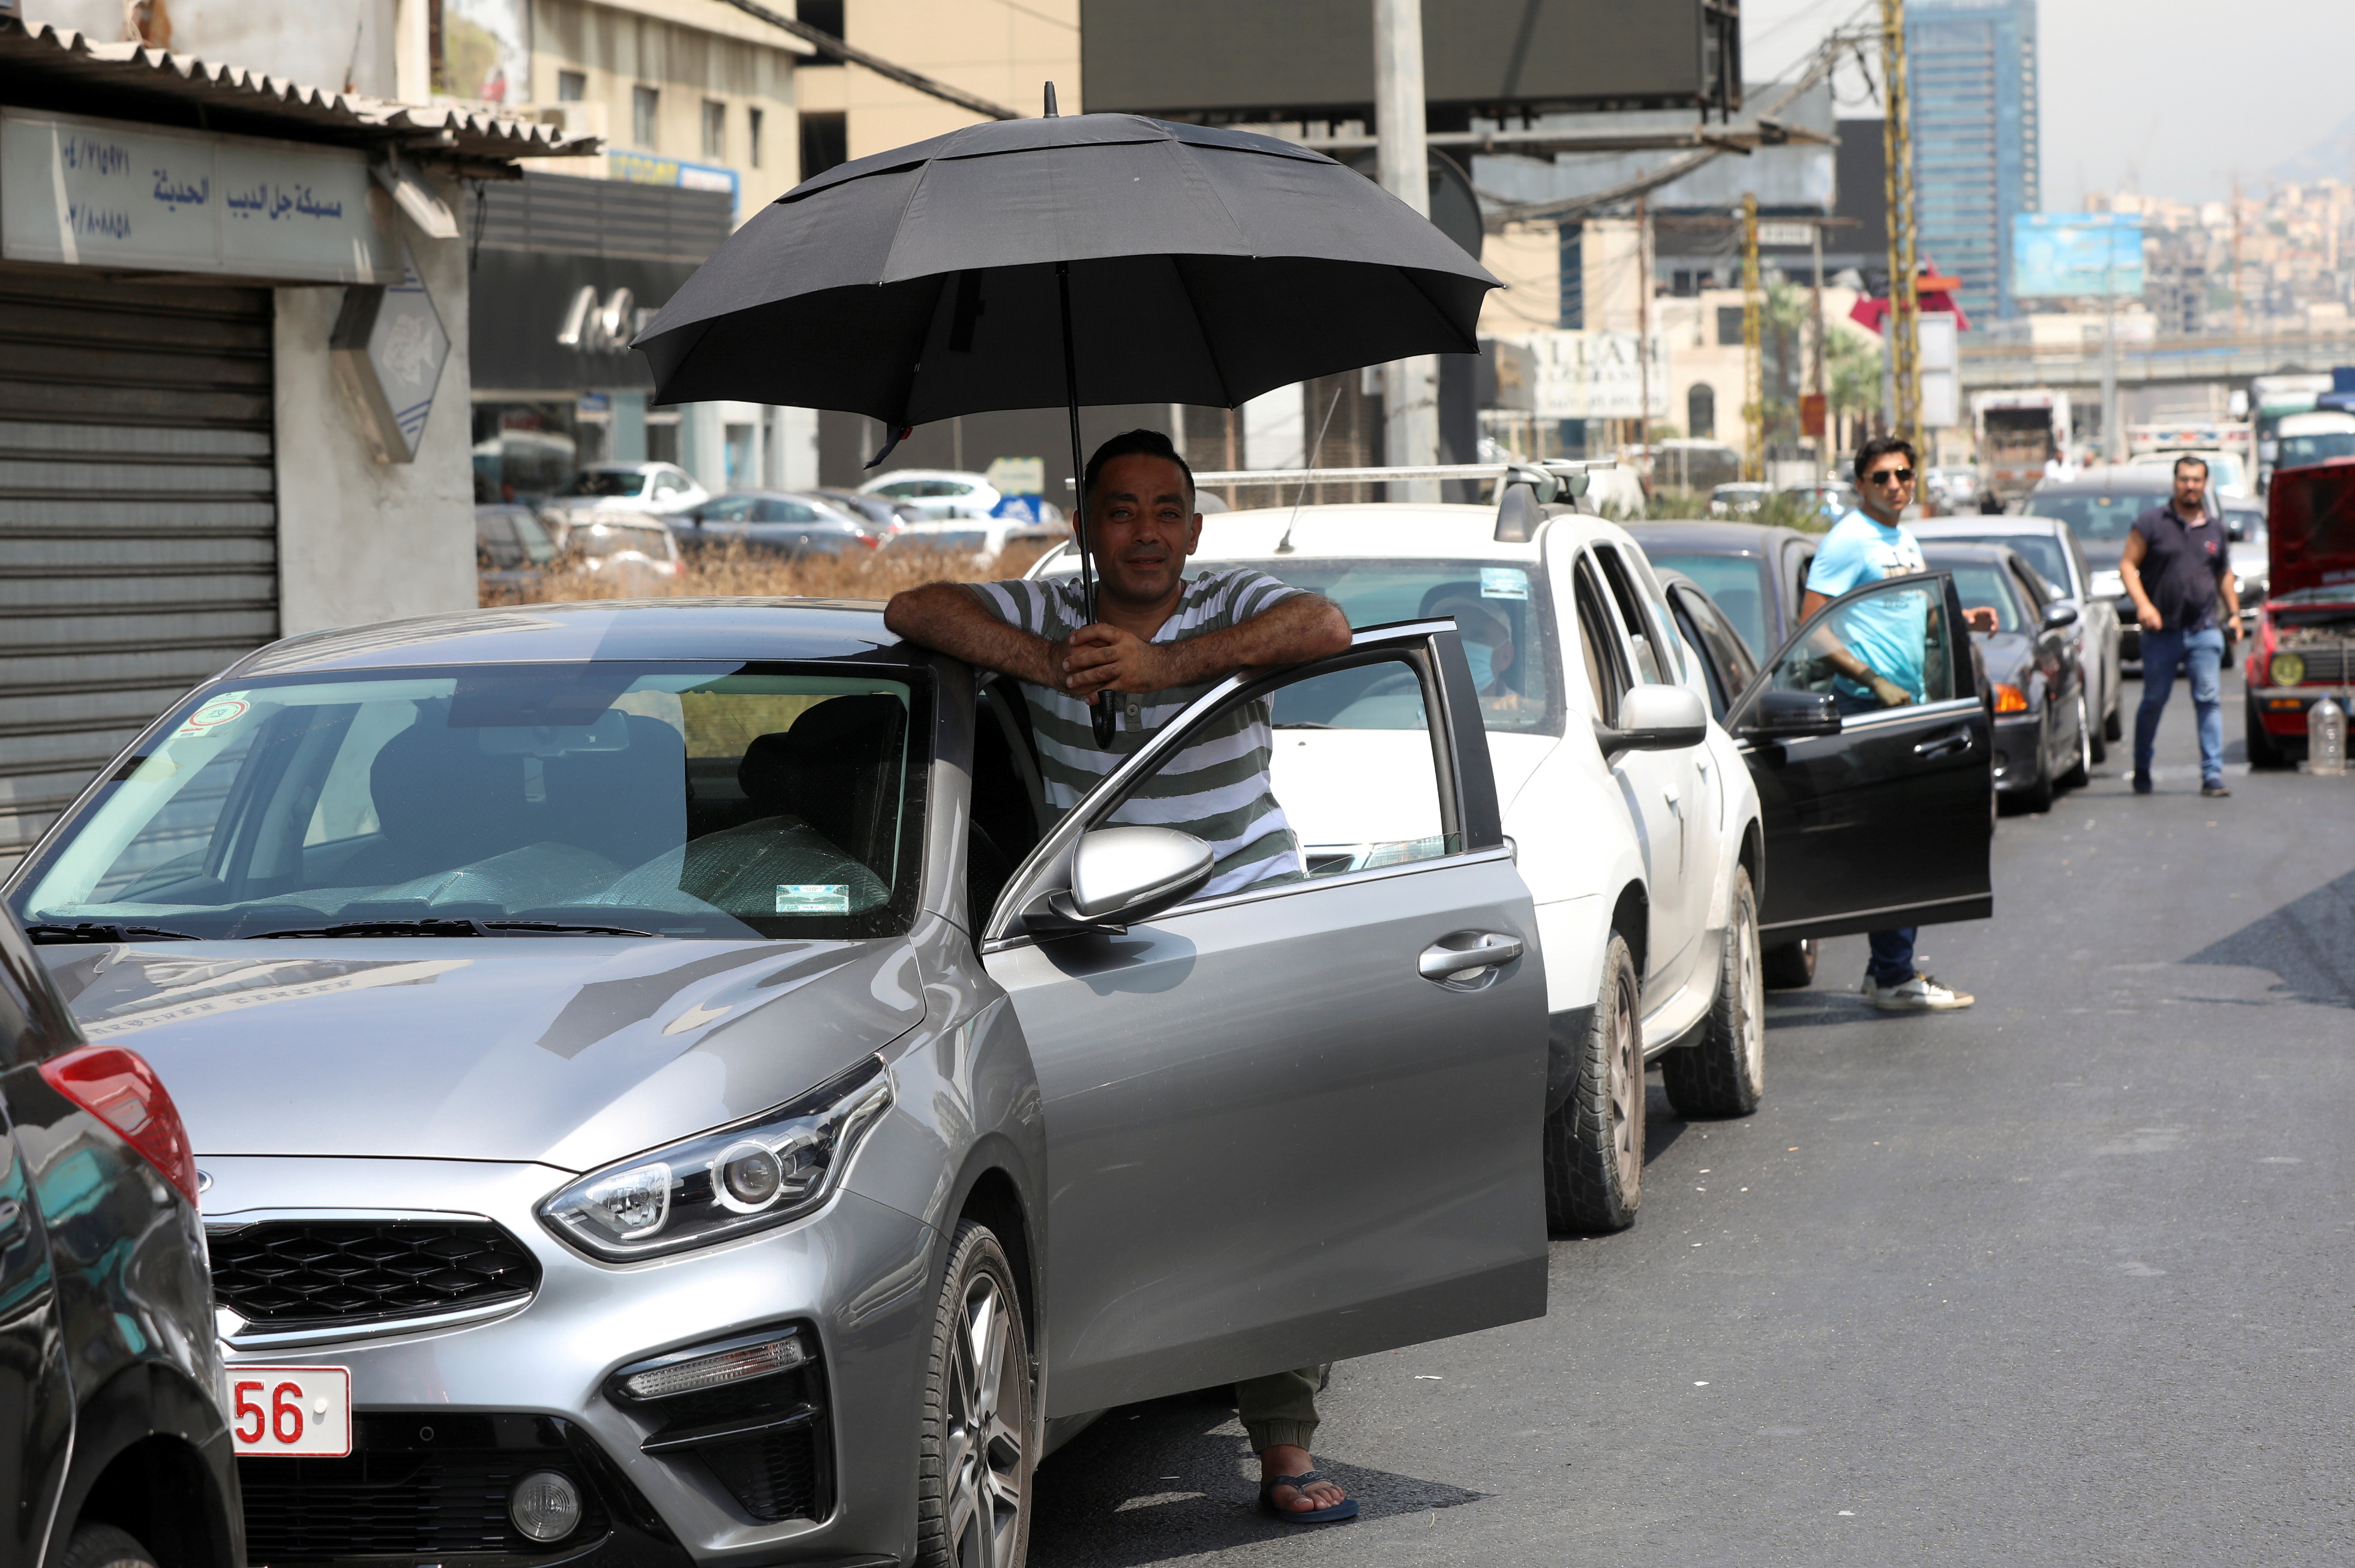 A man shields from the sun with an umbrella as he waits to get fuel from a gas station in Jal el-Dib